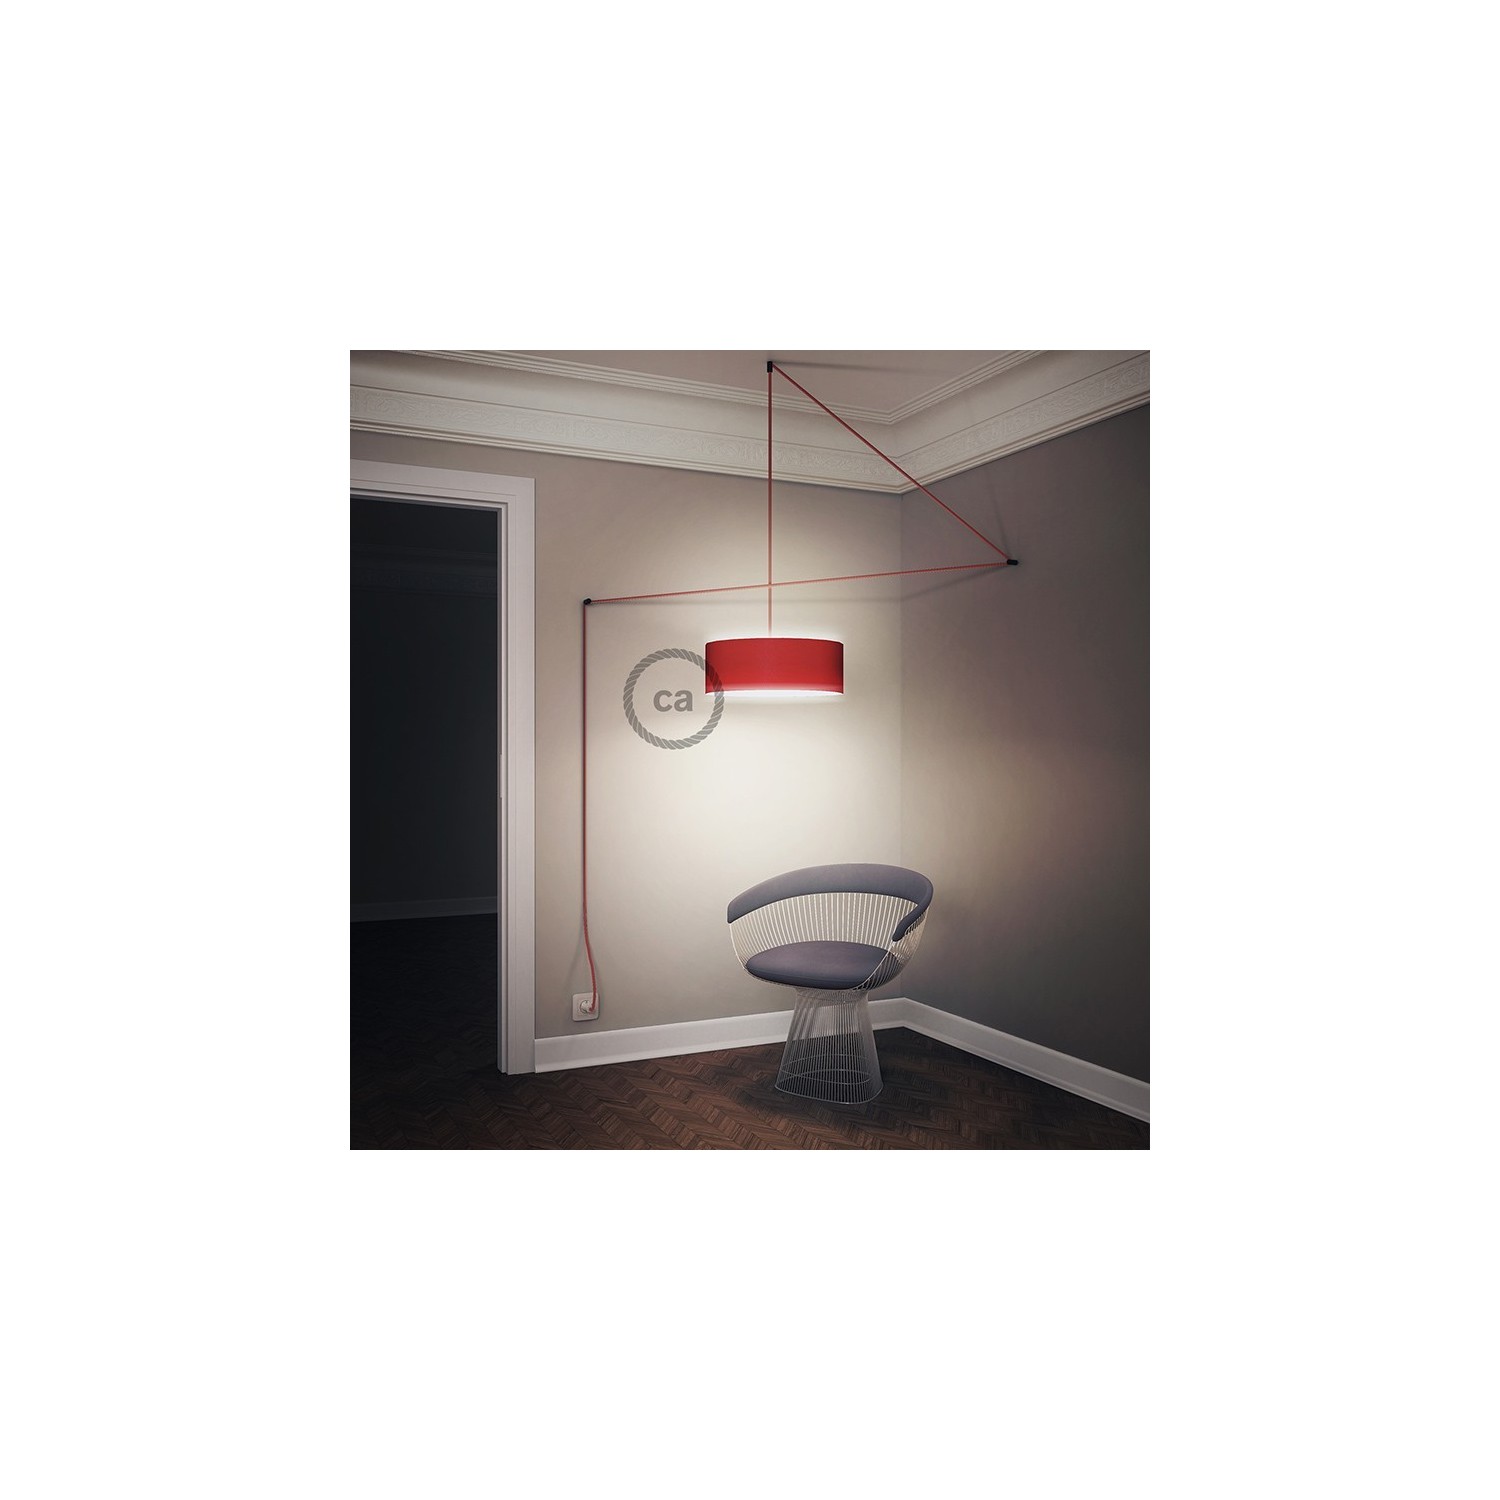 Create your RZ09 ZigZag Red Snake for lampshade and bring the light wherever you want.